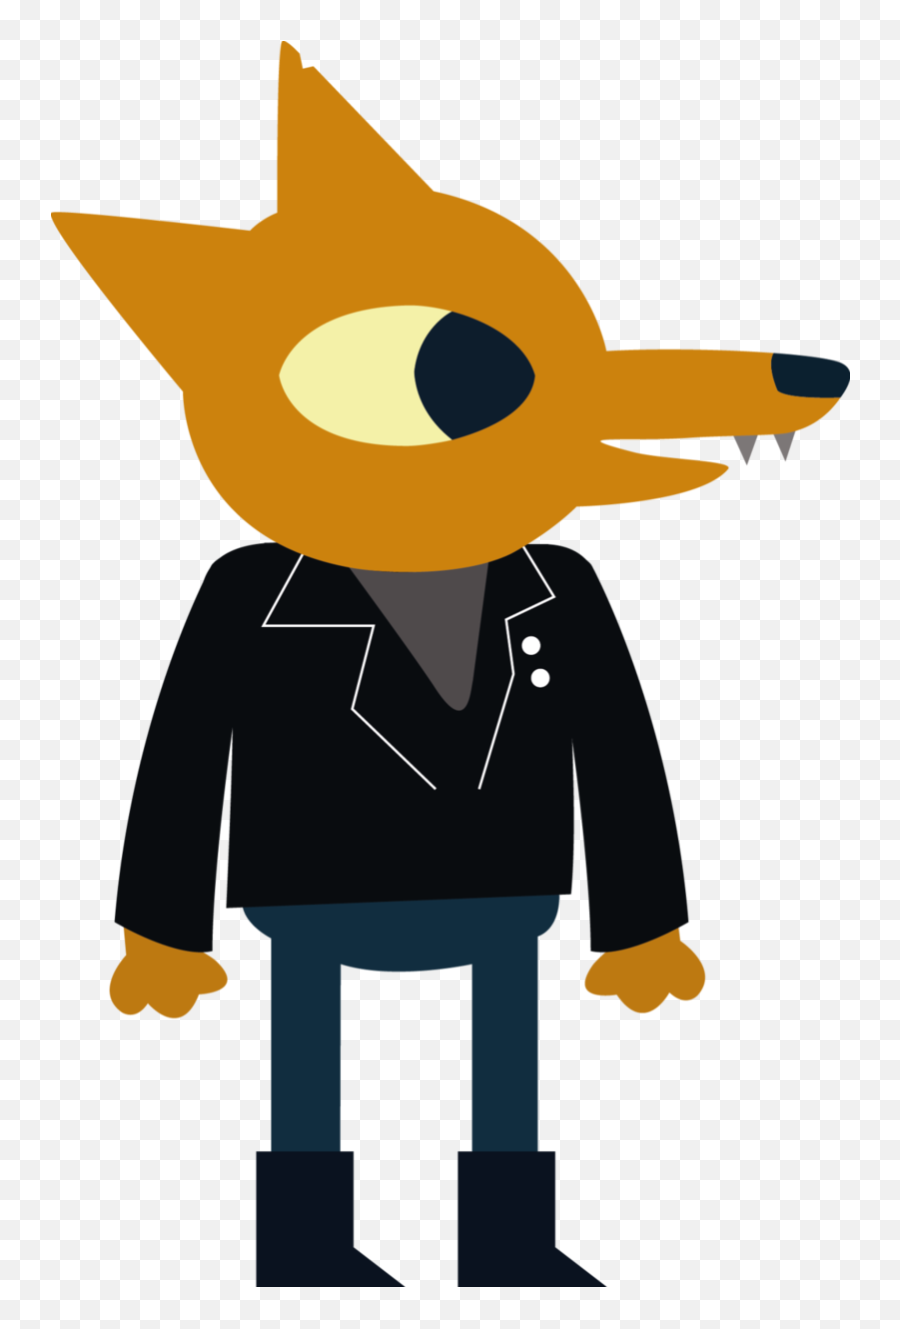 Night In The Woods Png Transparent - Transparent Night In The Woods Gregg,Woods Png